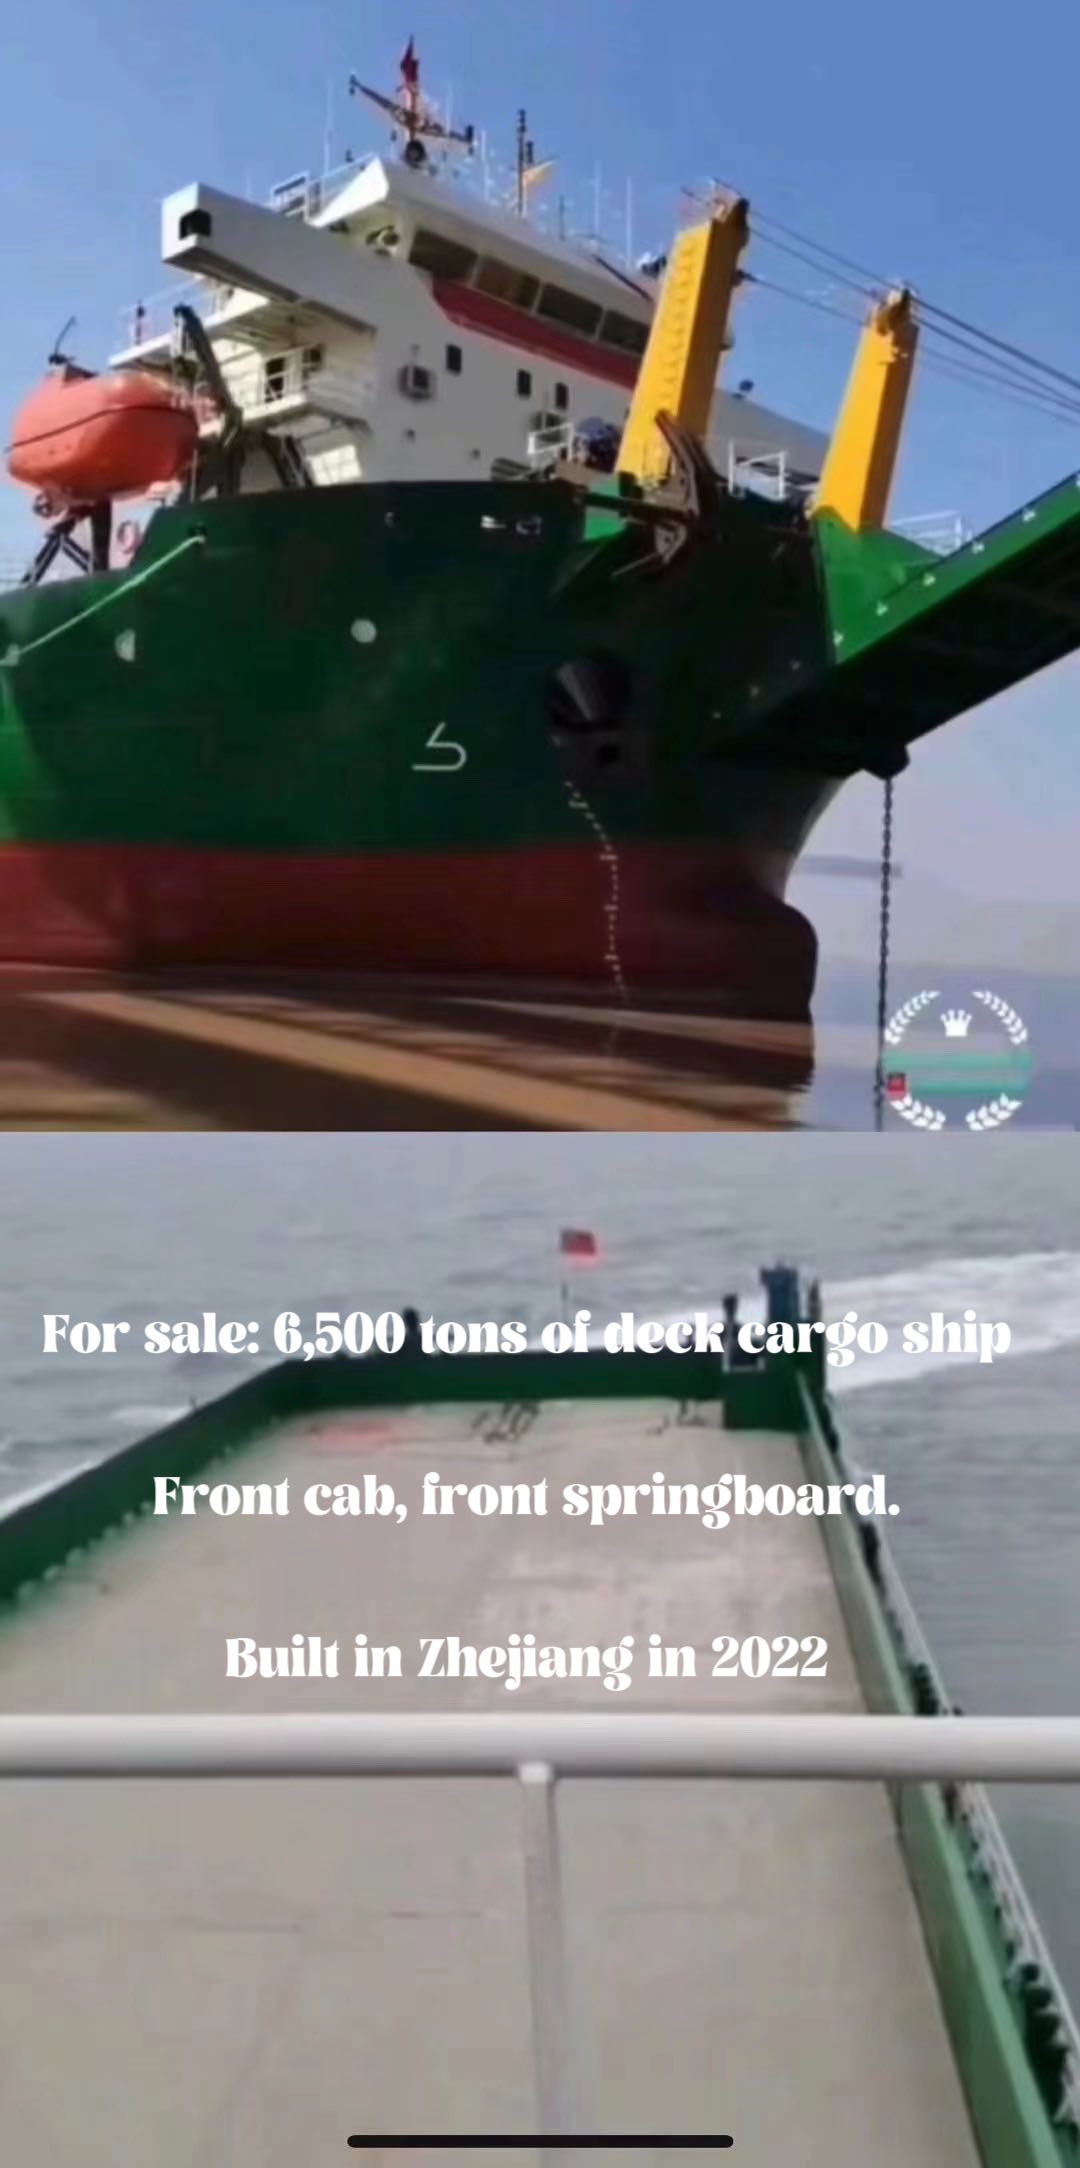 For sale: 6,500 tons of deck cargo ship  Front cab, front springboard.  Built in Zhejiang in 2022